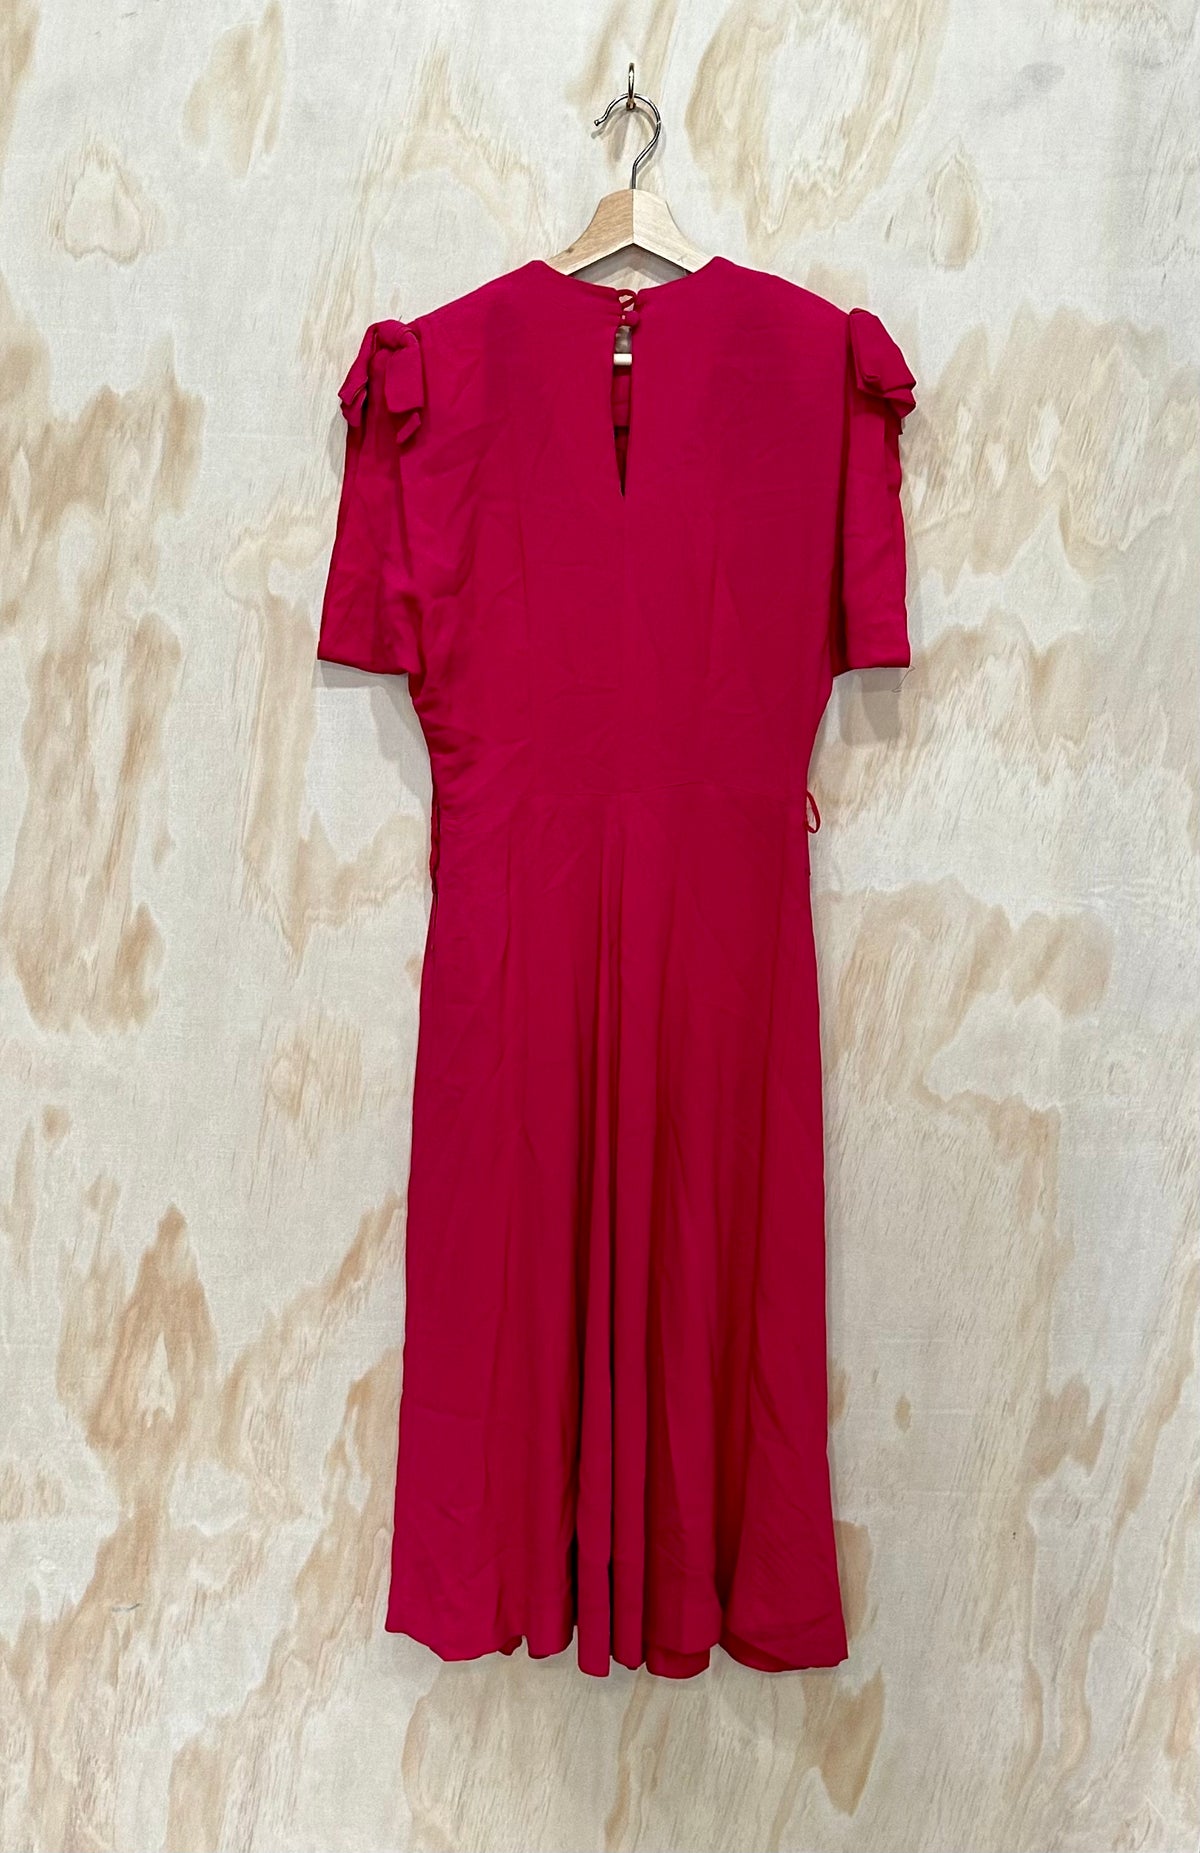 1940's Vintage Crepe Rayon pink evening gown cocktail dress